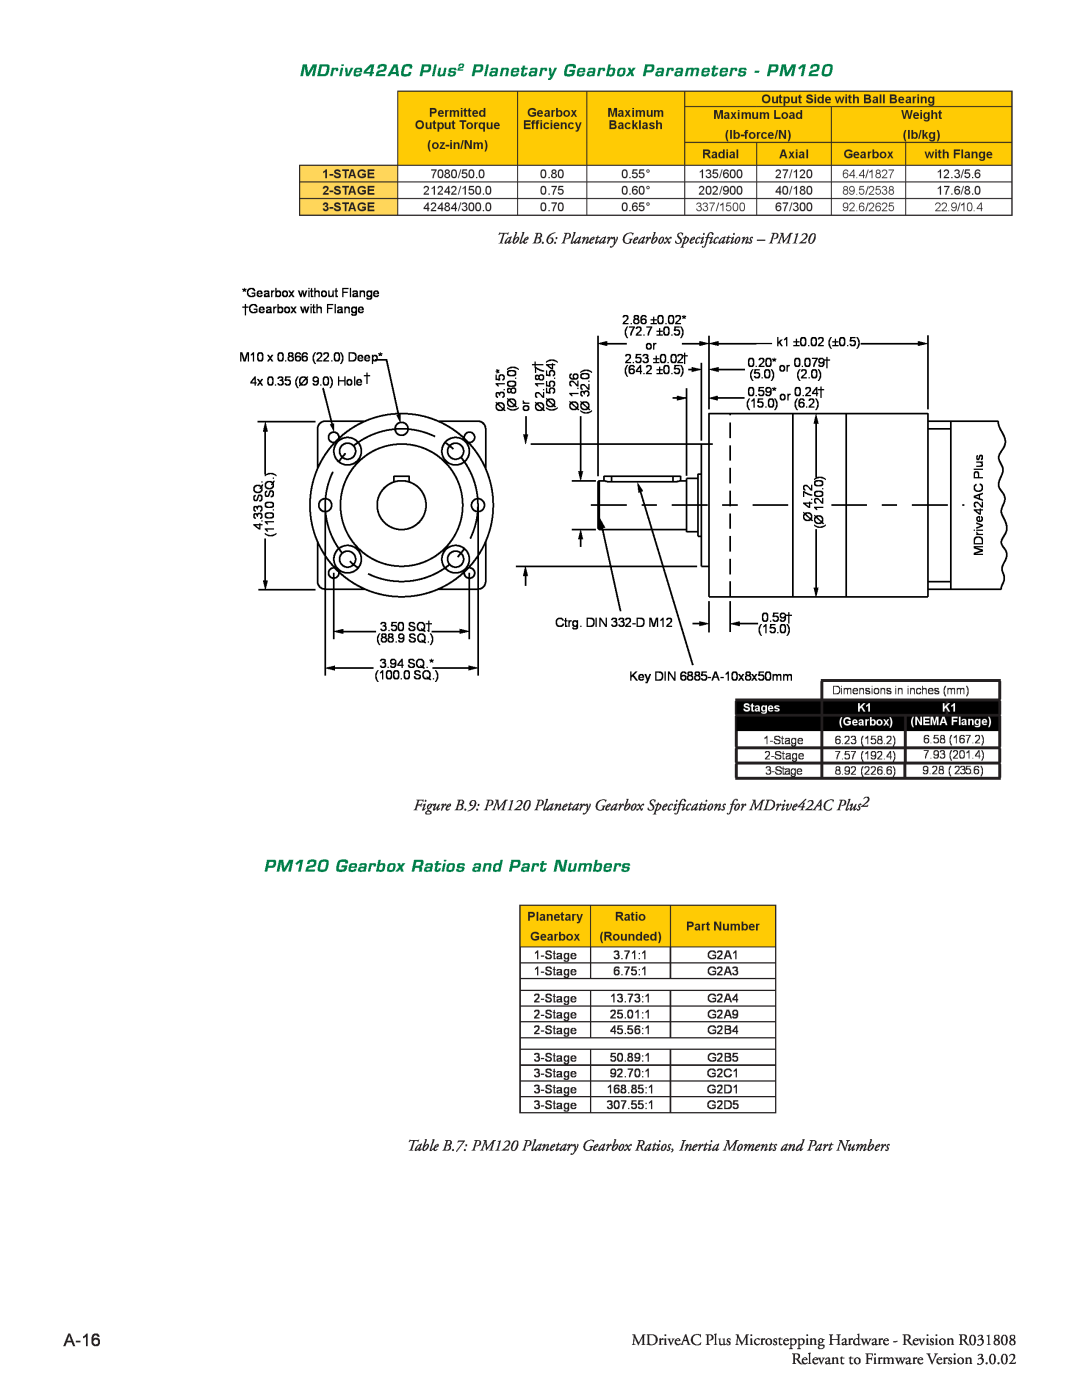 Intelligent Motion Systems MDrive34AC manual A-16, PM120 Gearbox Ratios and Part Numbers 